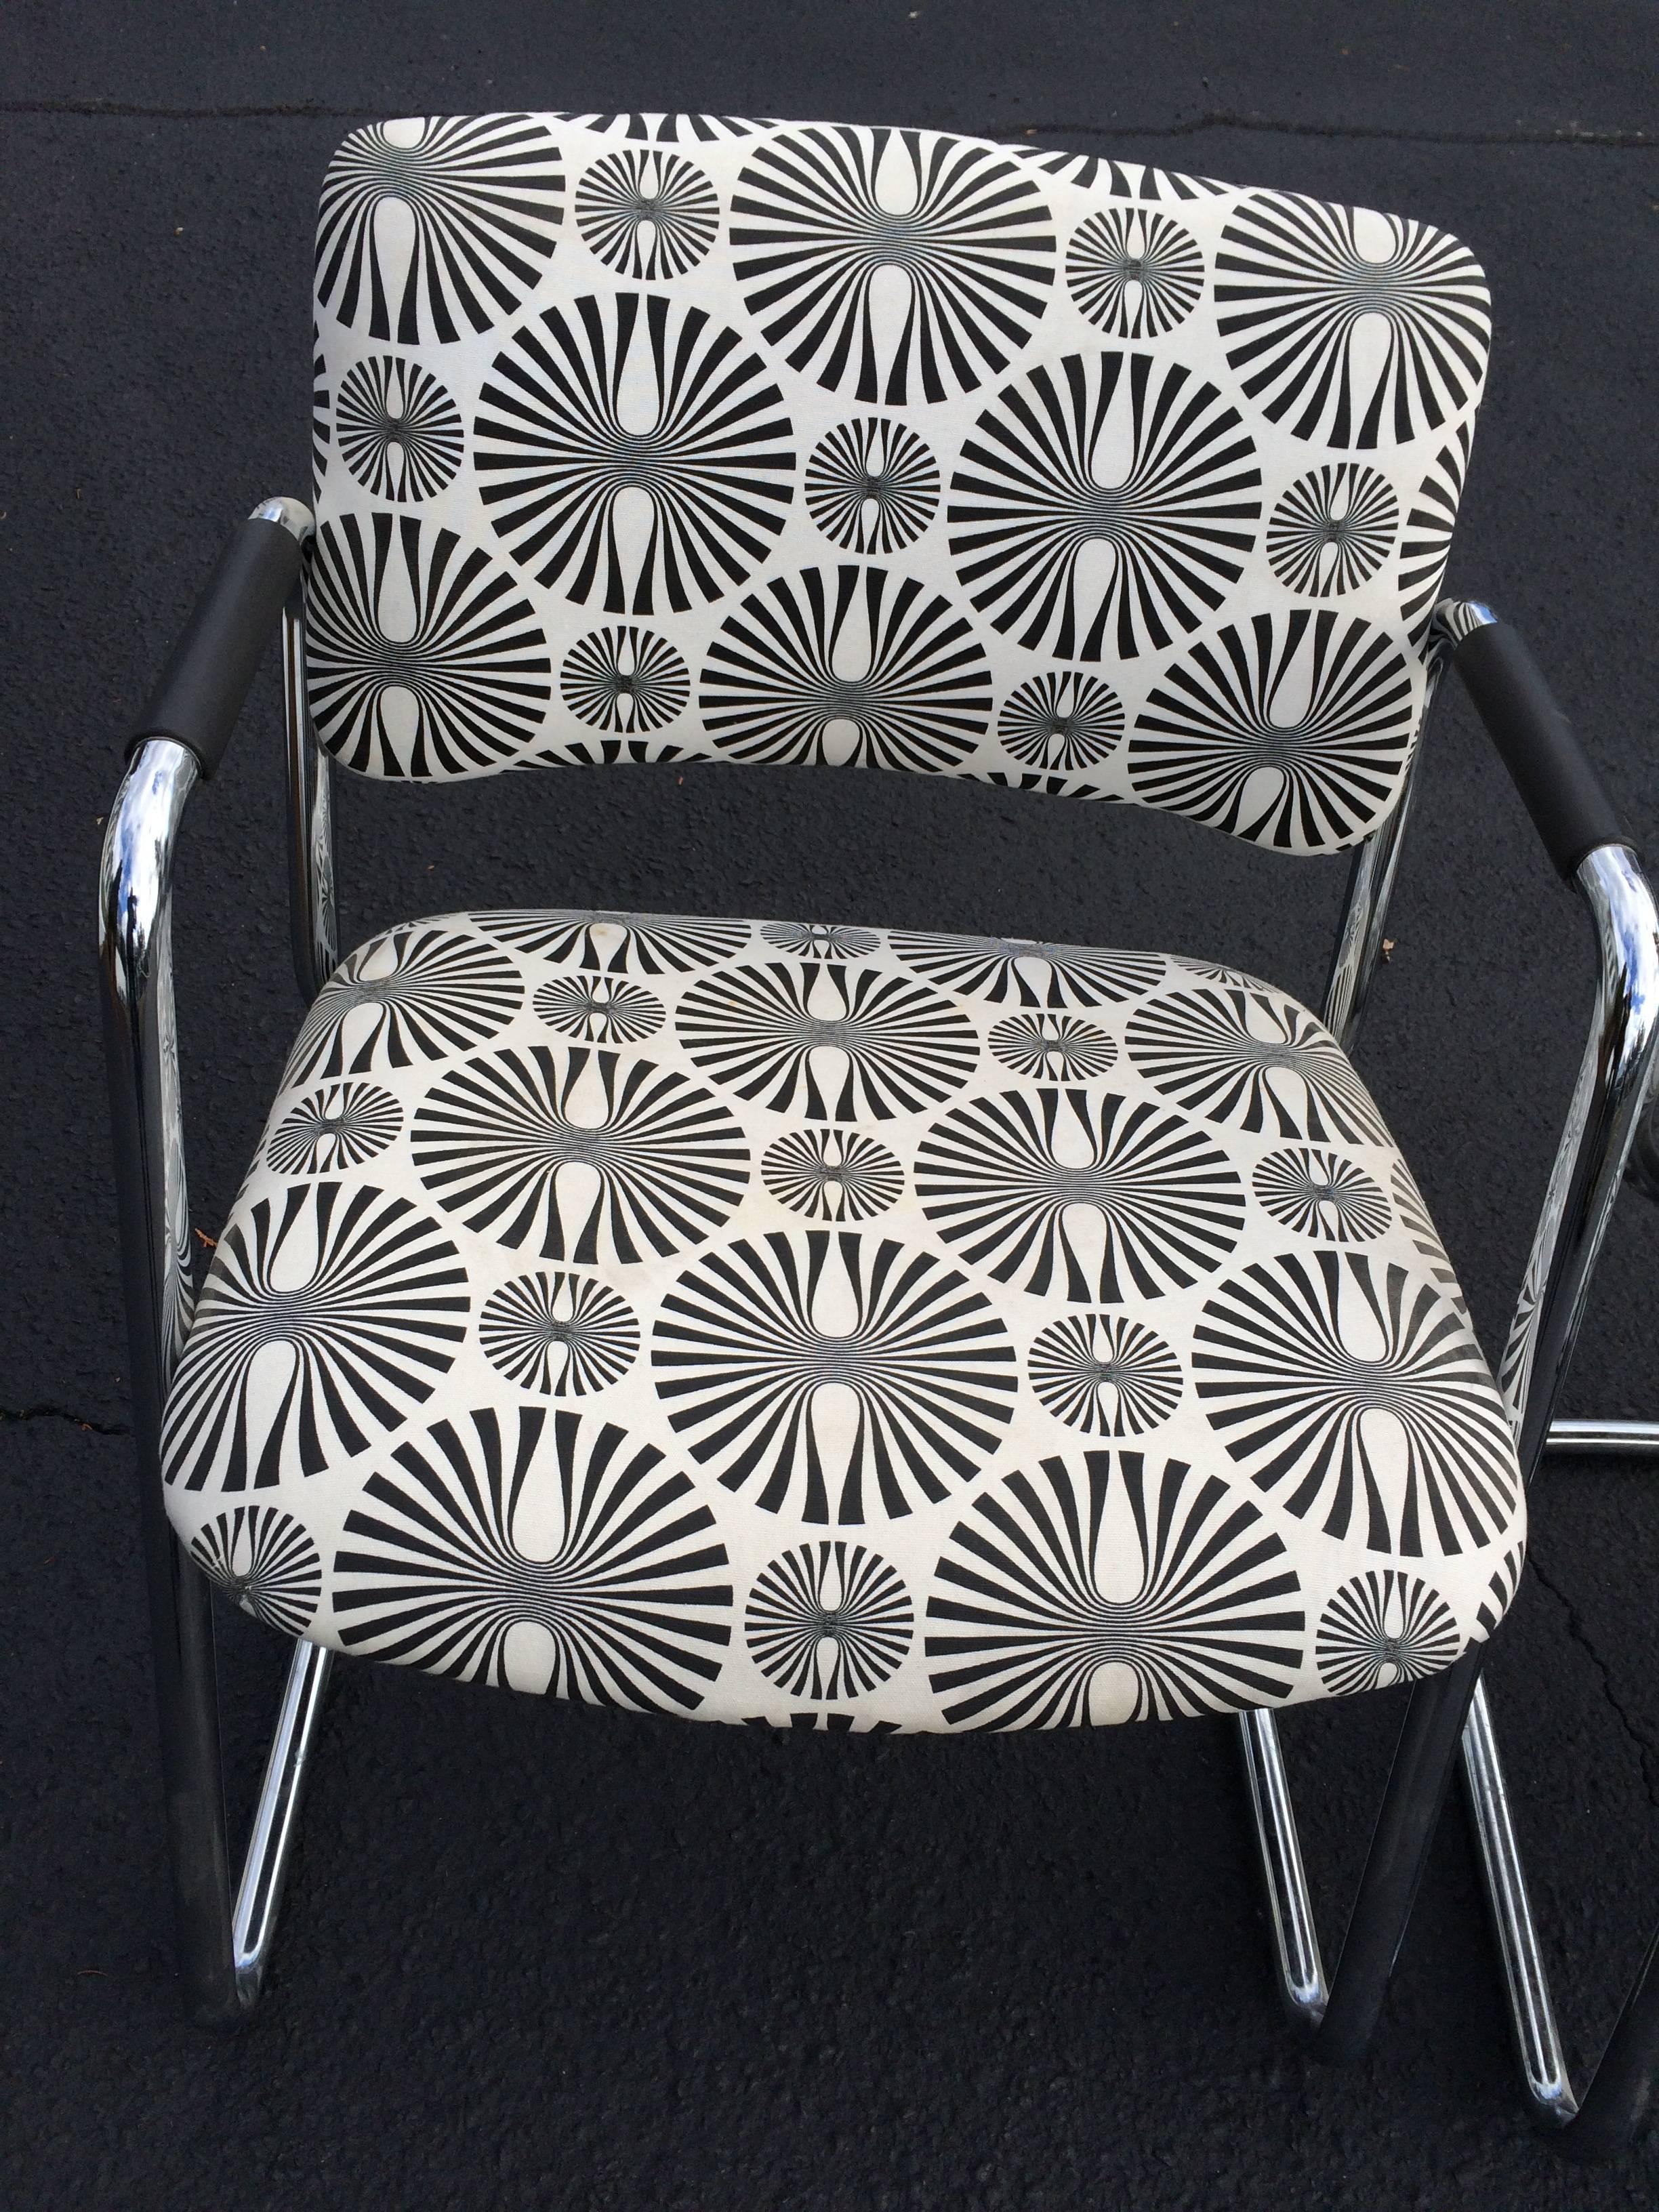 Pair of Mid-Century Optical Art Chairs in Black and White 1